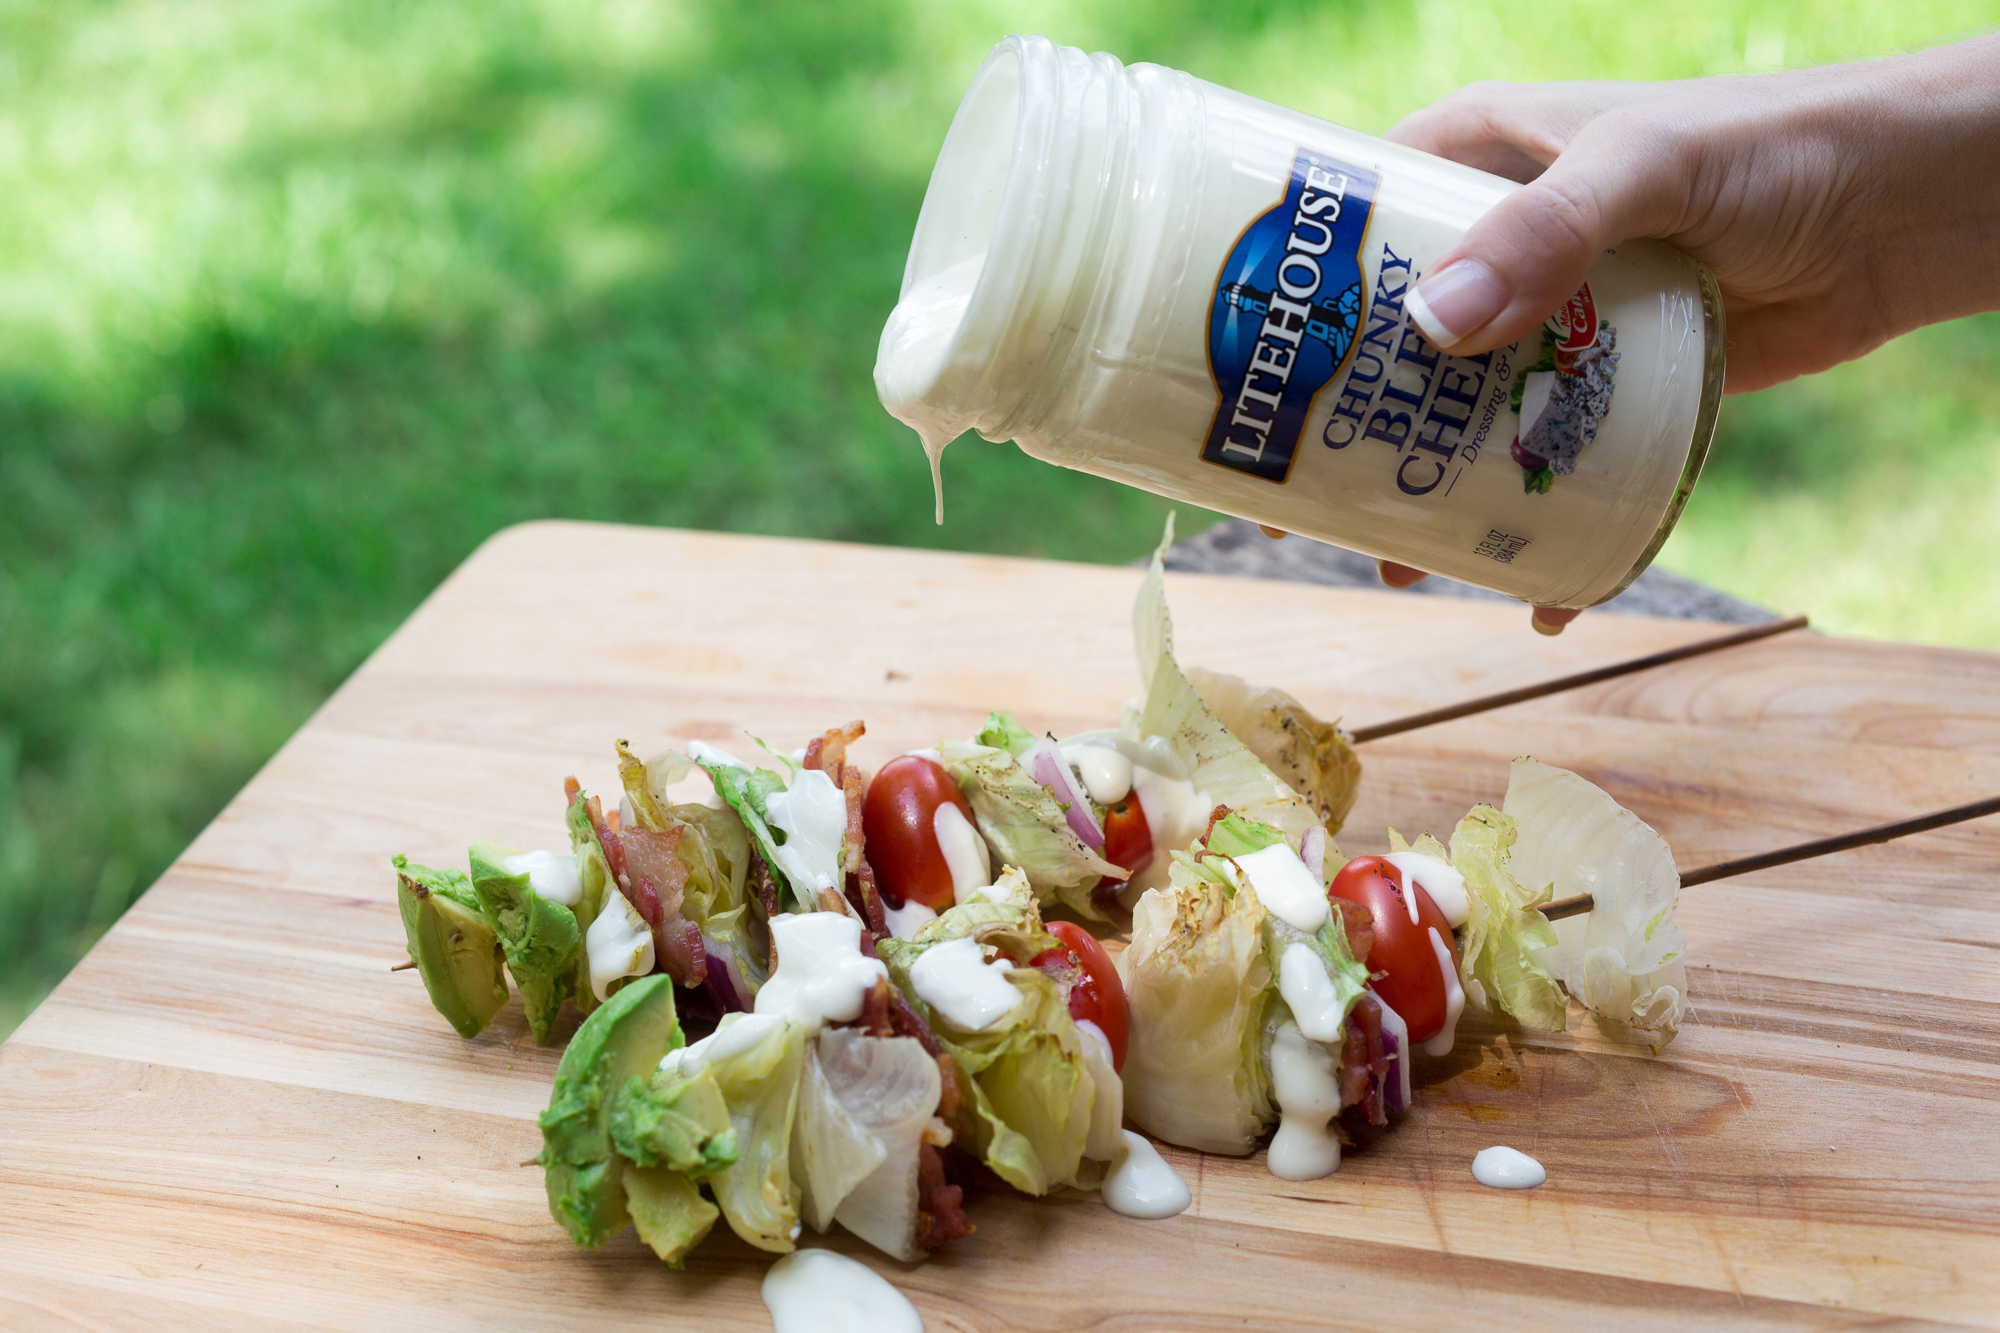 grilled-wedge-salad-skewers-finished-skewers-drizzle-dressing